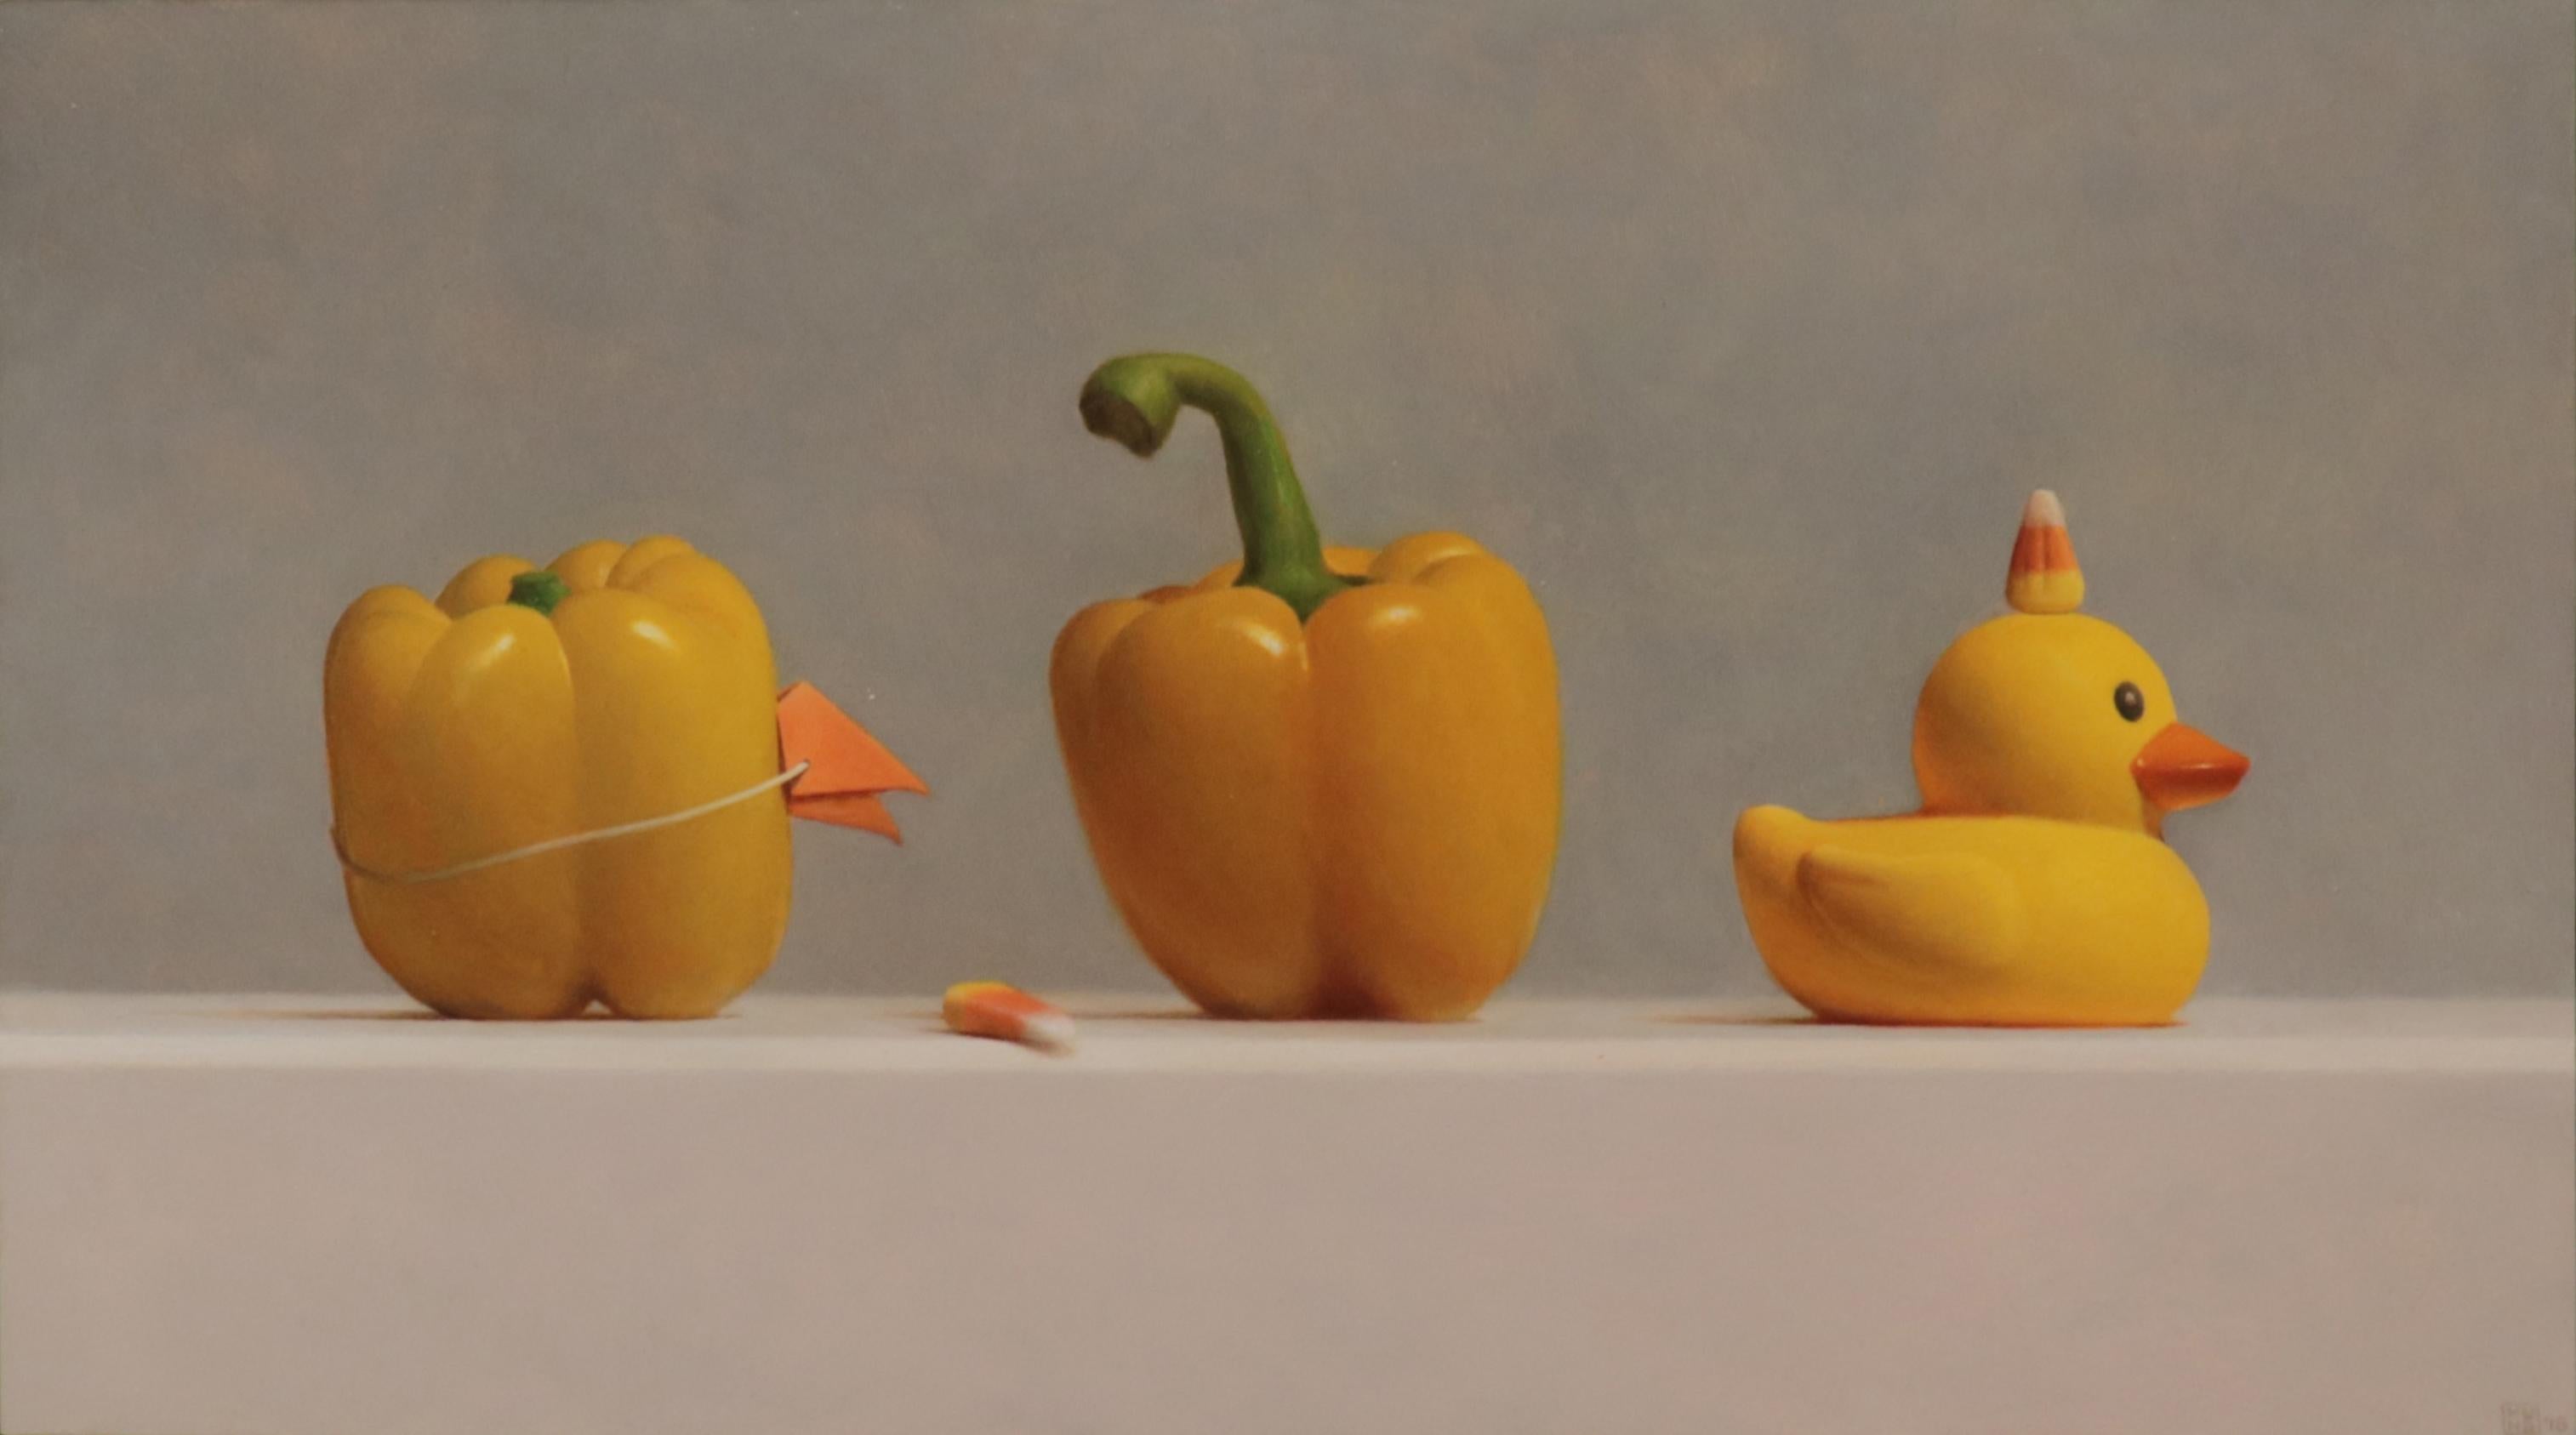 IMPOSTERS #17 (DUCK, YELLOW PEPPERS, & CANDY CORN), still-life, photo-realism - Painting by Samuel Hung